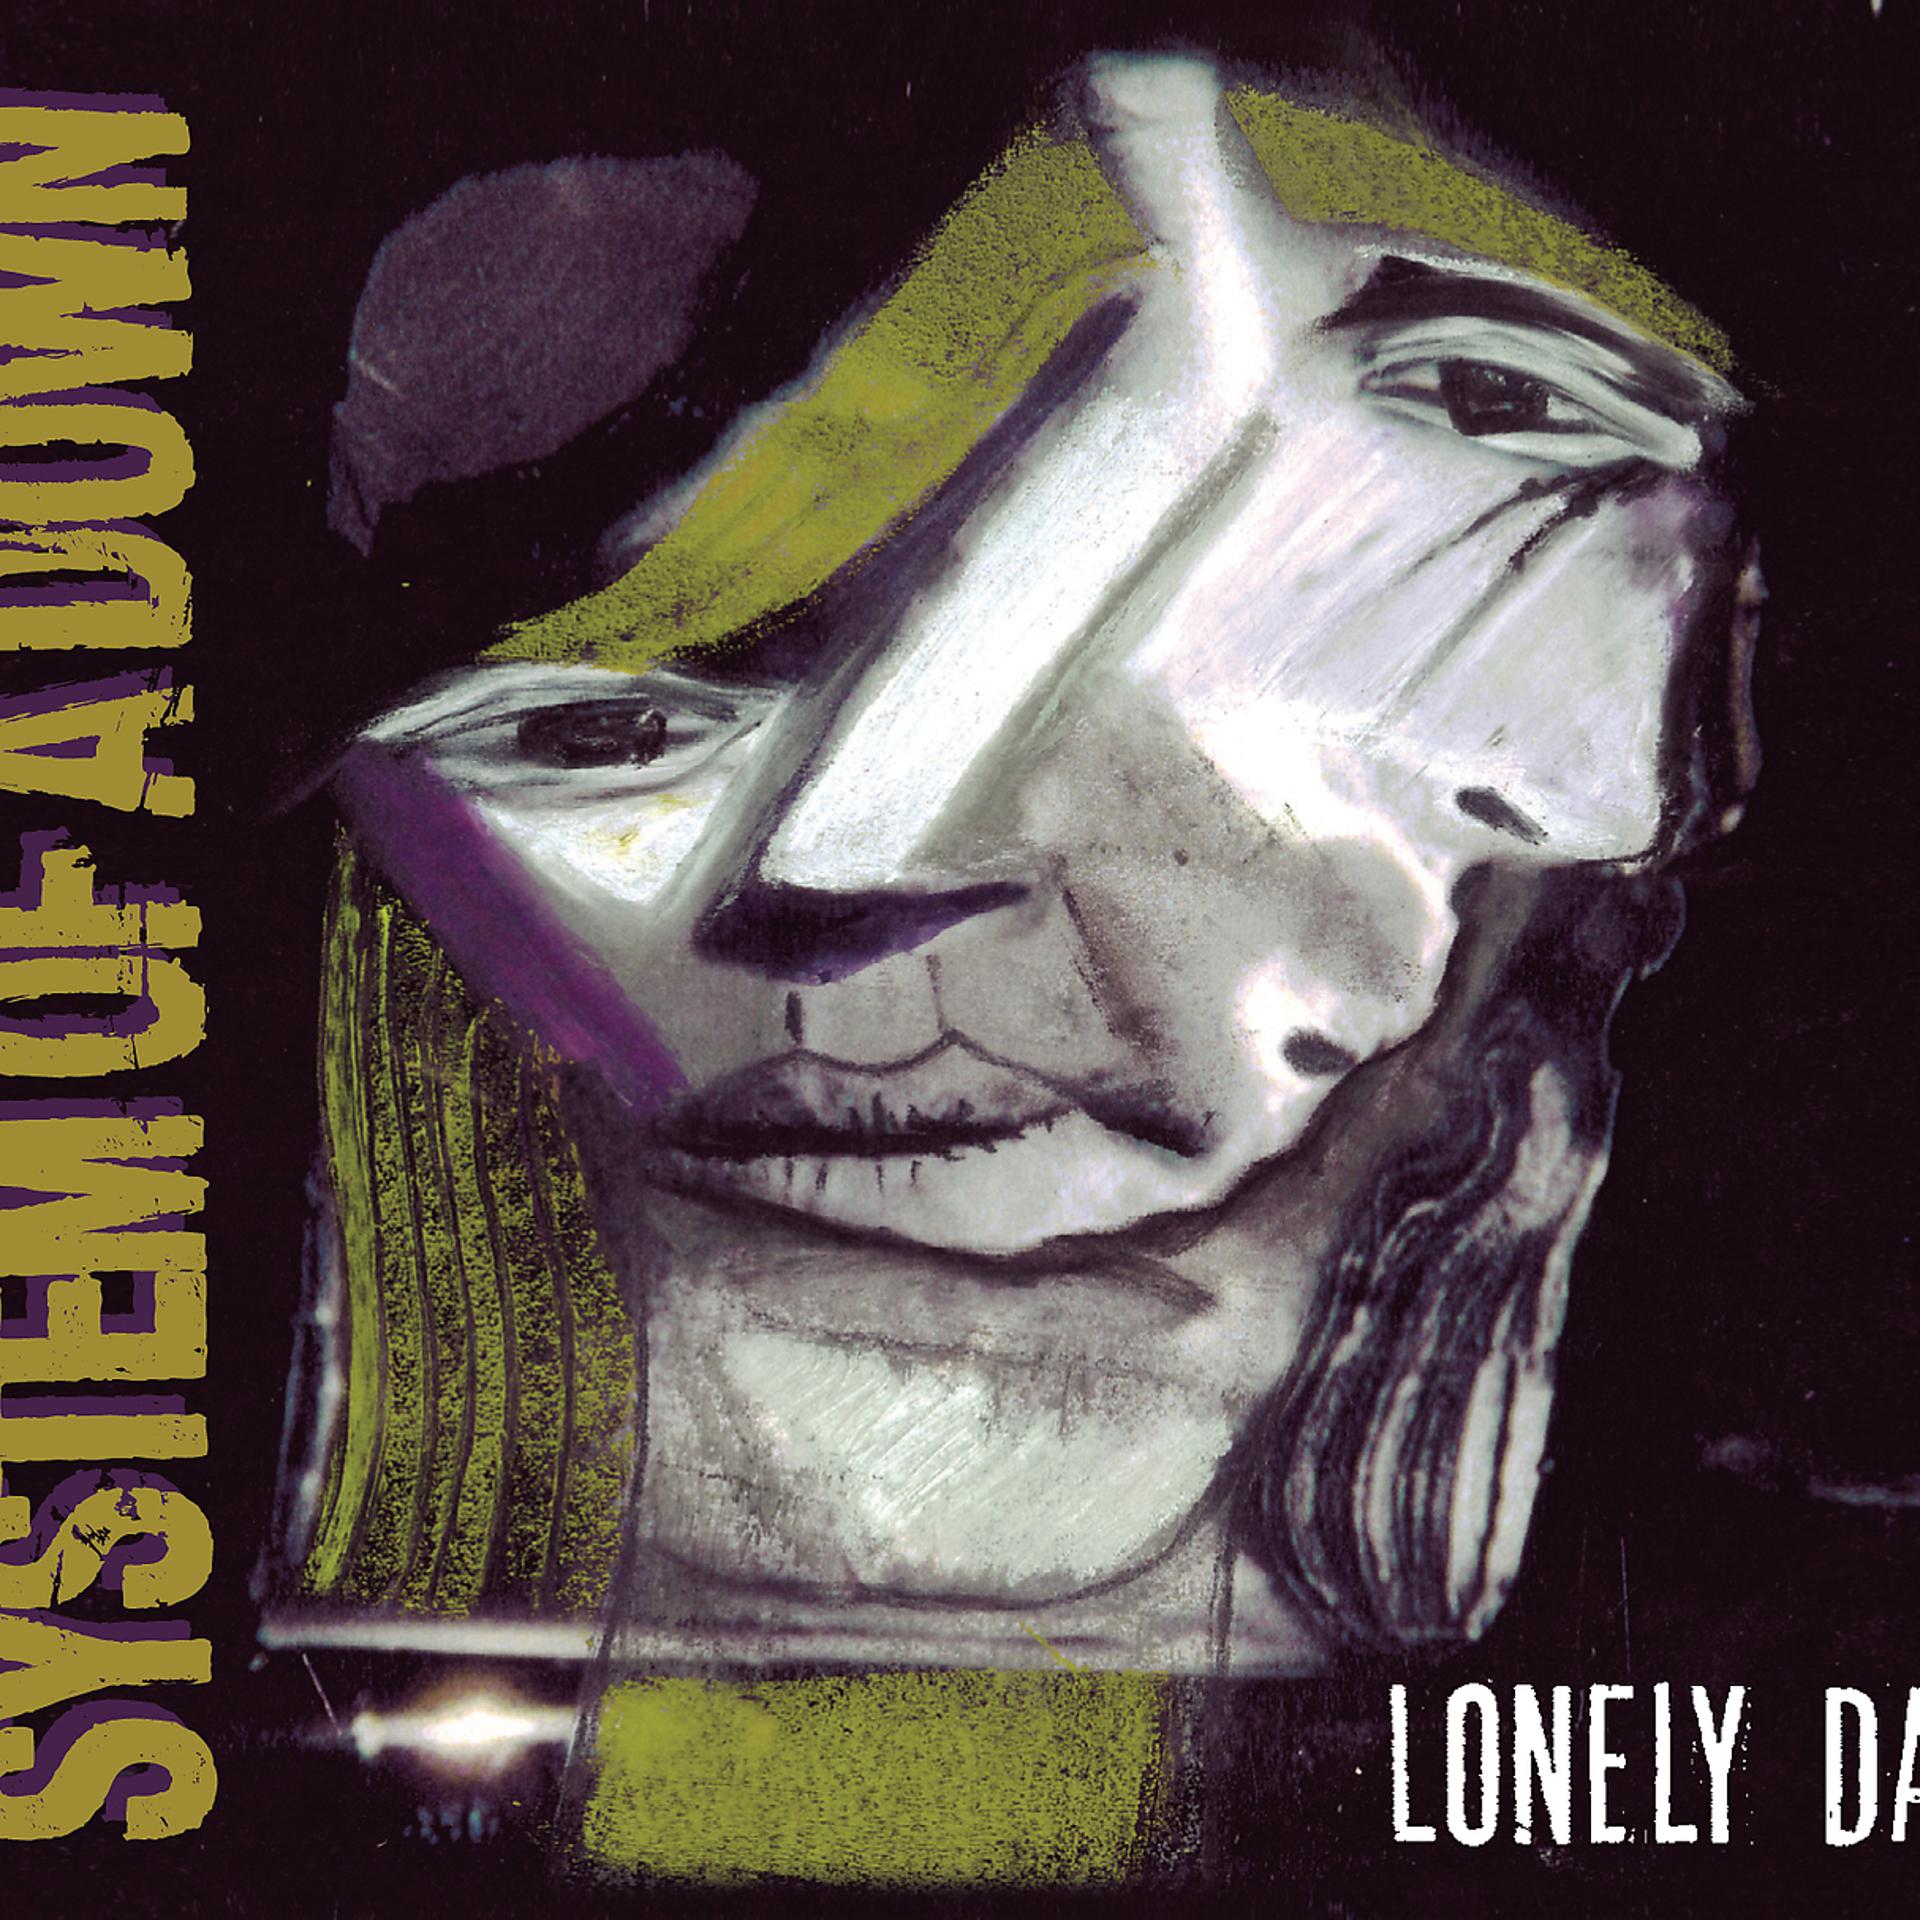 Such lonely. Lonely Day System of a down. System of a down Lonely Day альбом. Lonely Day обложка. SOAD Lonely Day обложка.